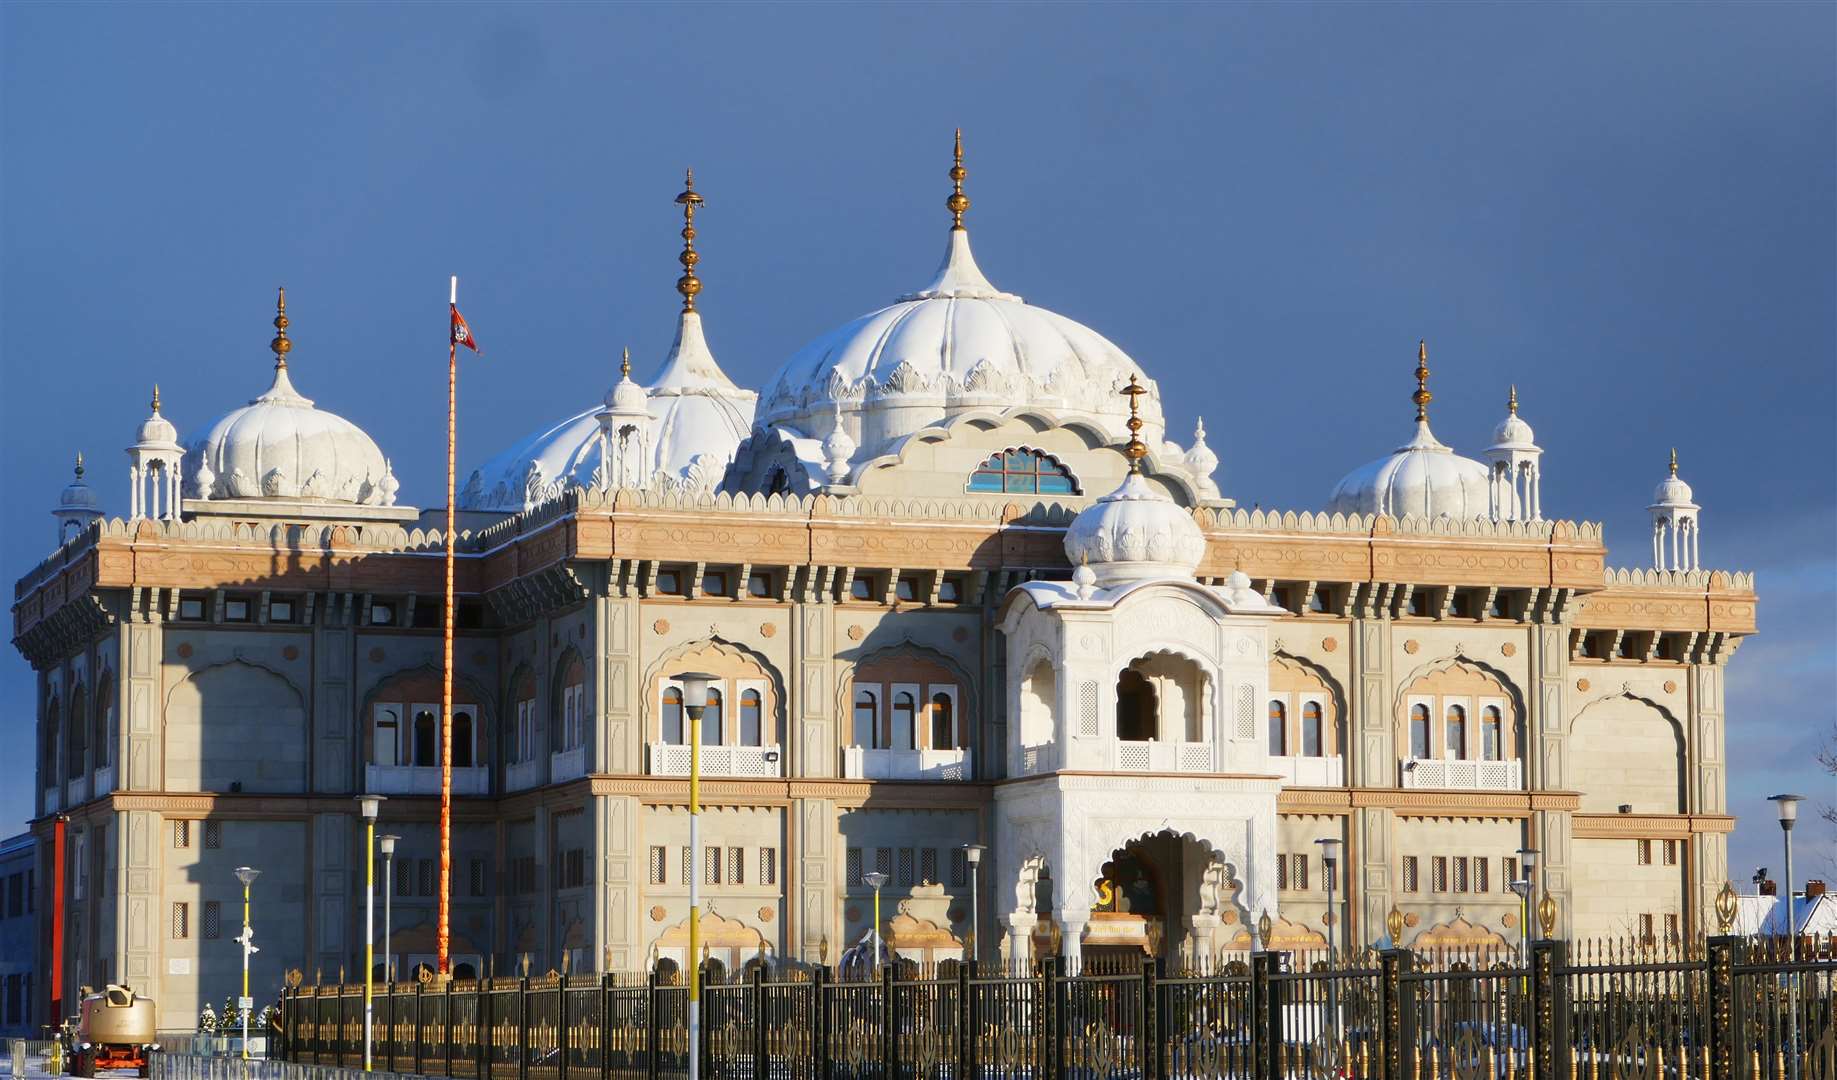 The 'assault' took place inside the gurdwara. Picture: Fraser Gray